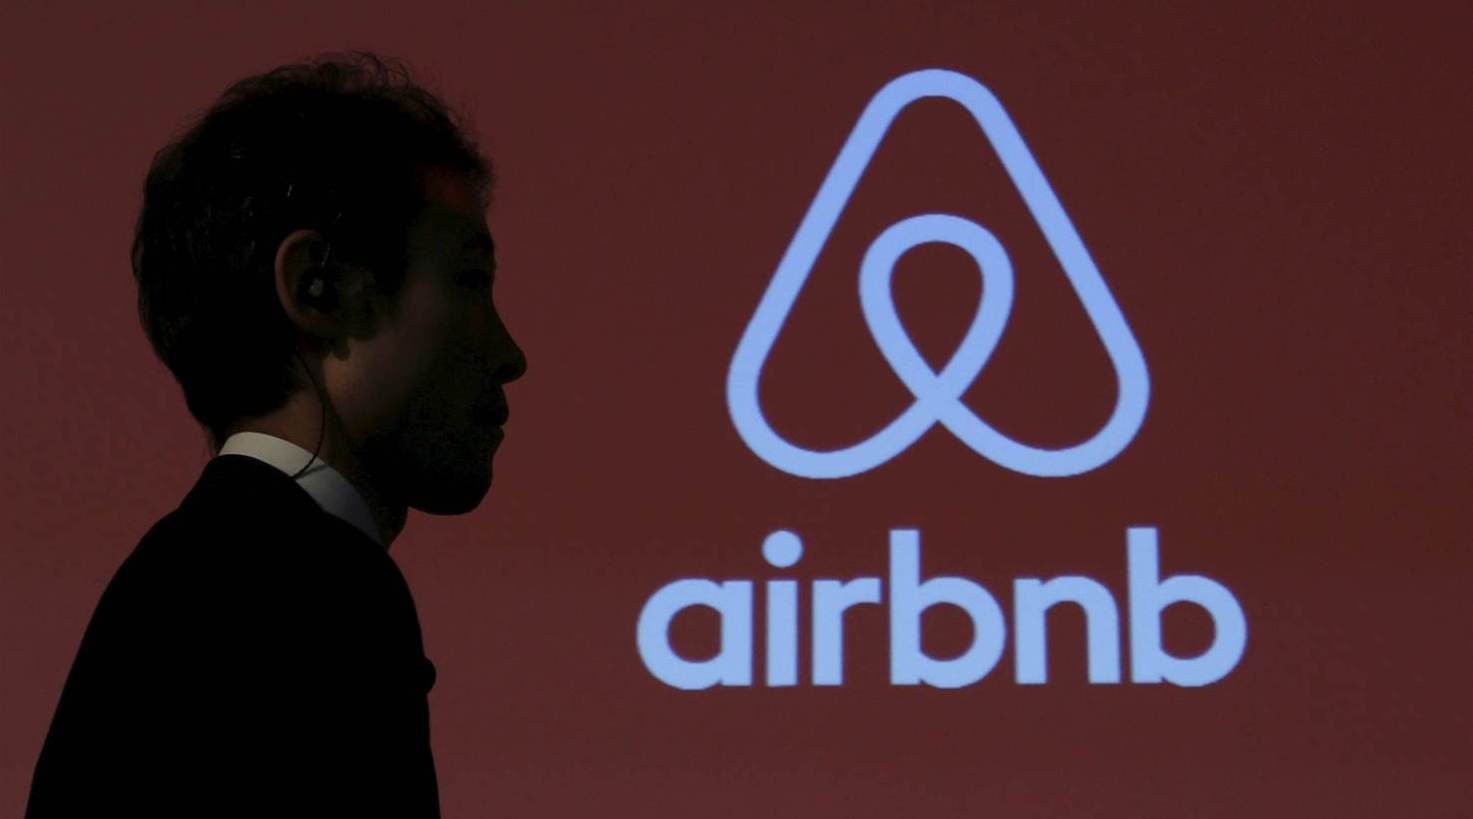 Airbnb’s former China head is said to have violated company code